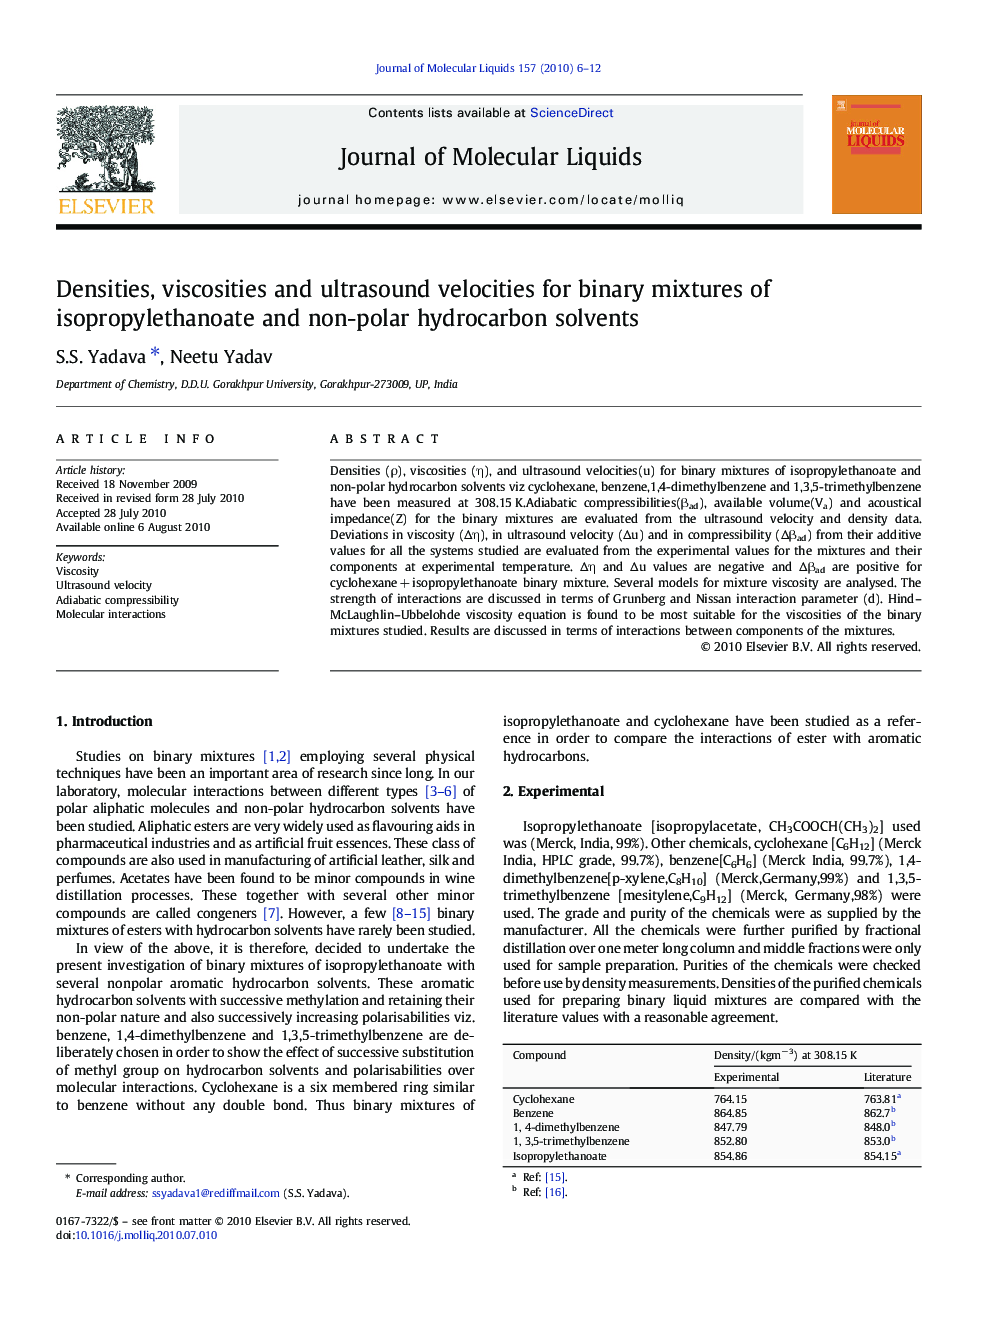 Densities, viscosities and ultrasound velocities for binary mixtures of isopropylethanoate and non-polar hydrocarbon solvents